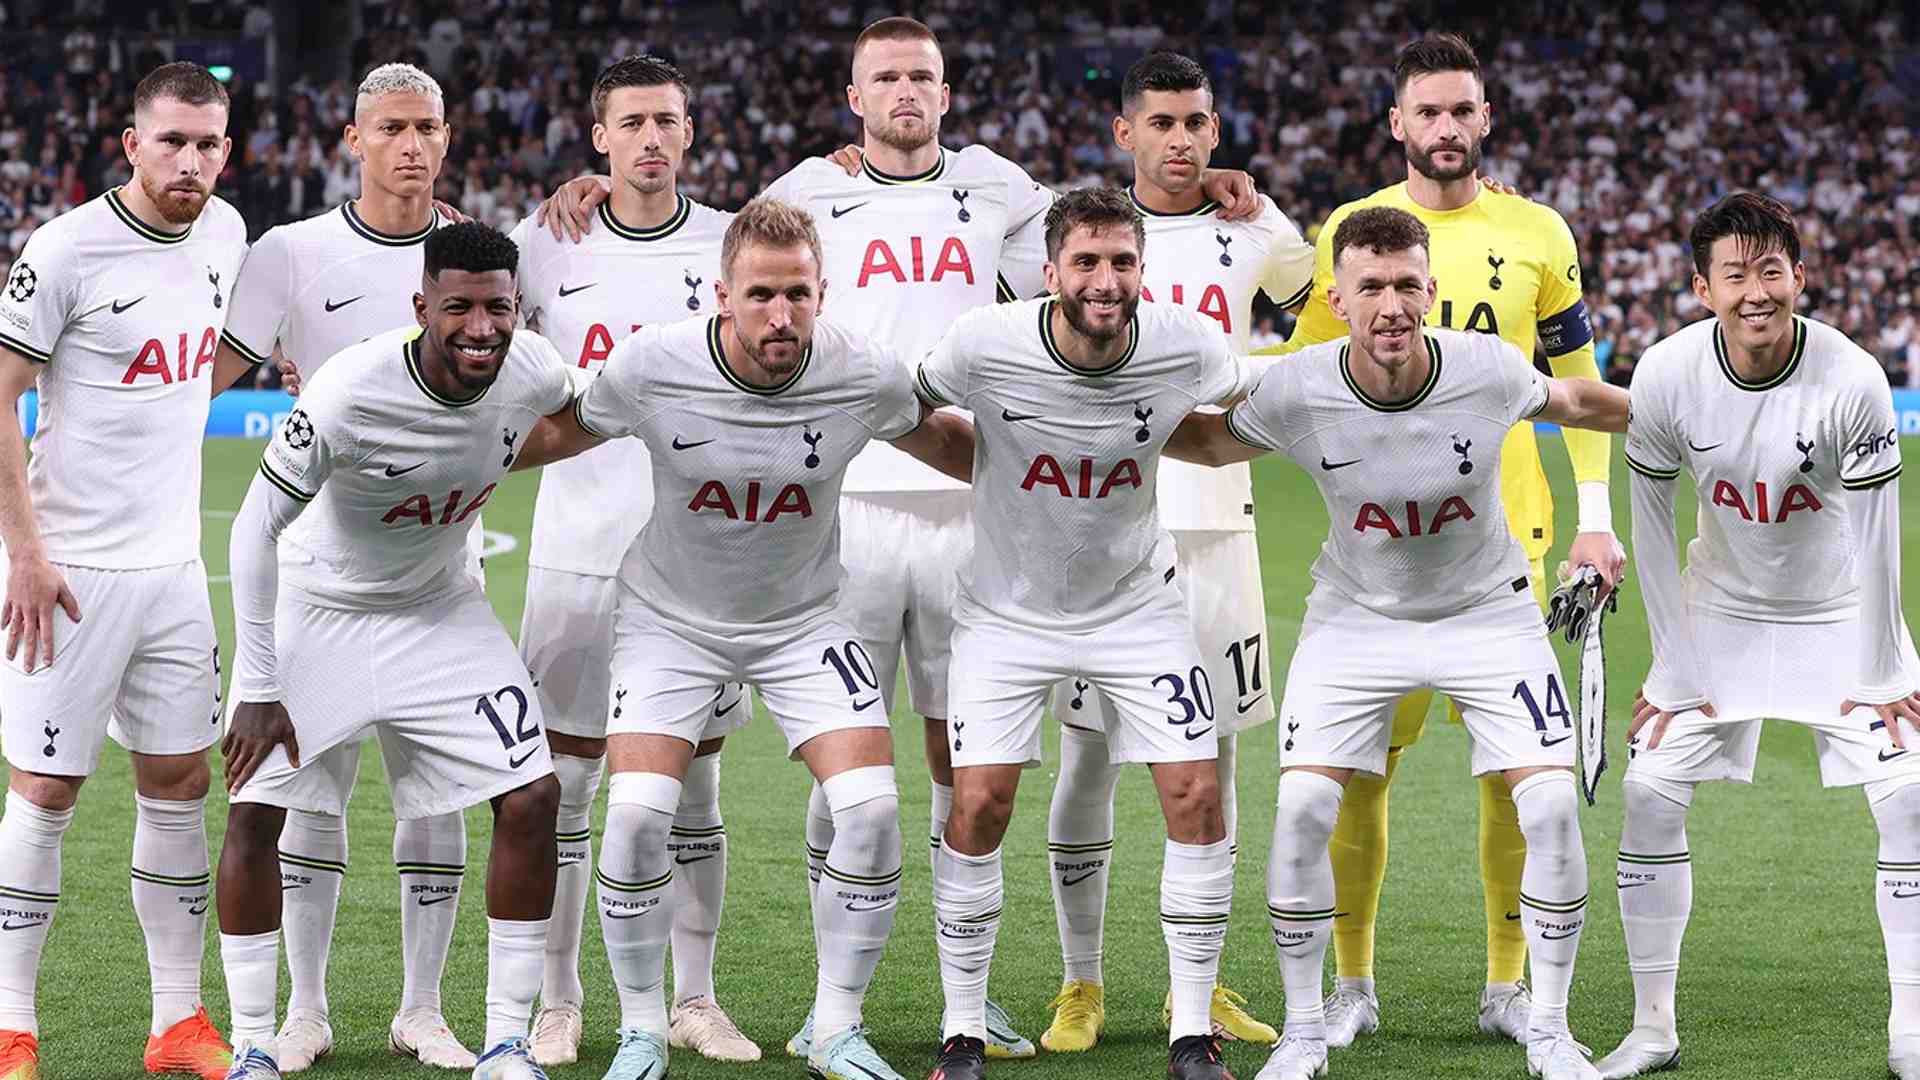 File photo of Tottenham Hotspur players; Credit: Twitter/@SpursOfficial